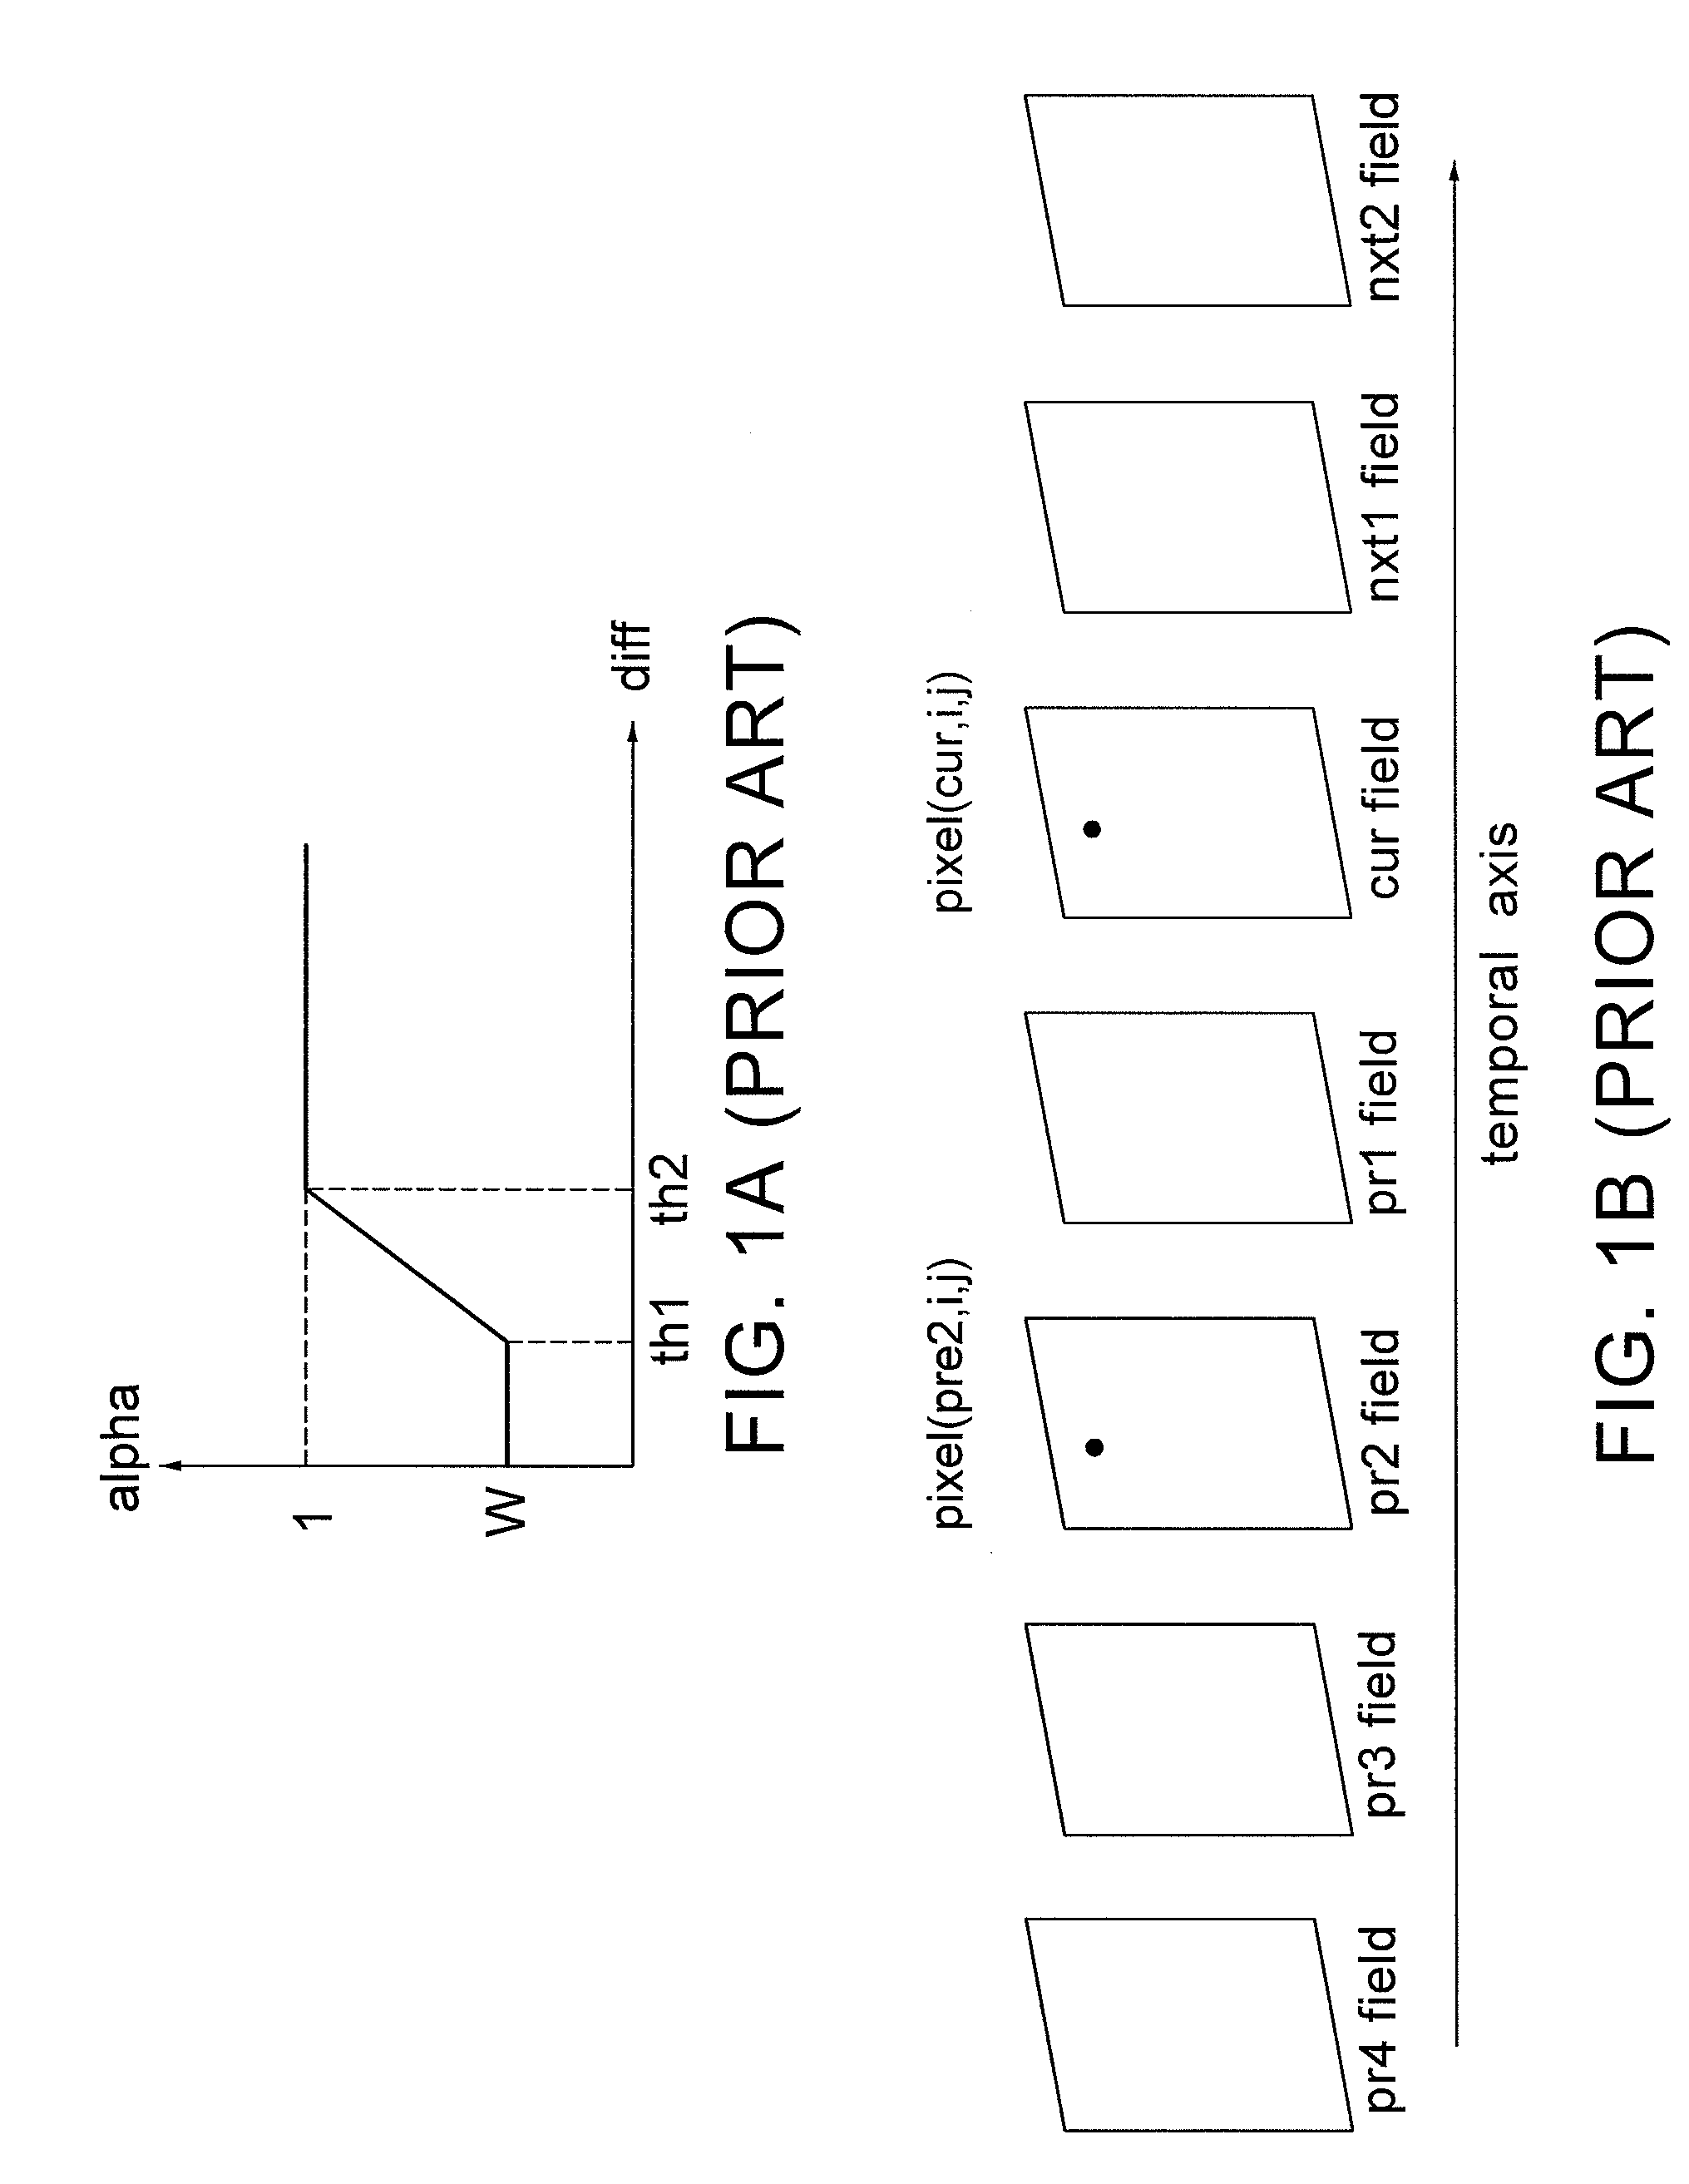 Dynamic noise filter and sigma filtering method